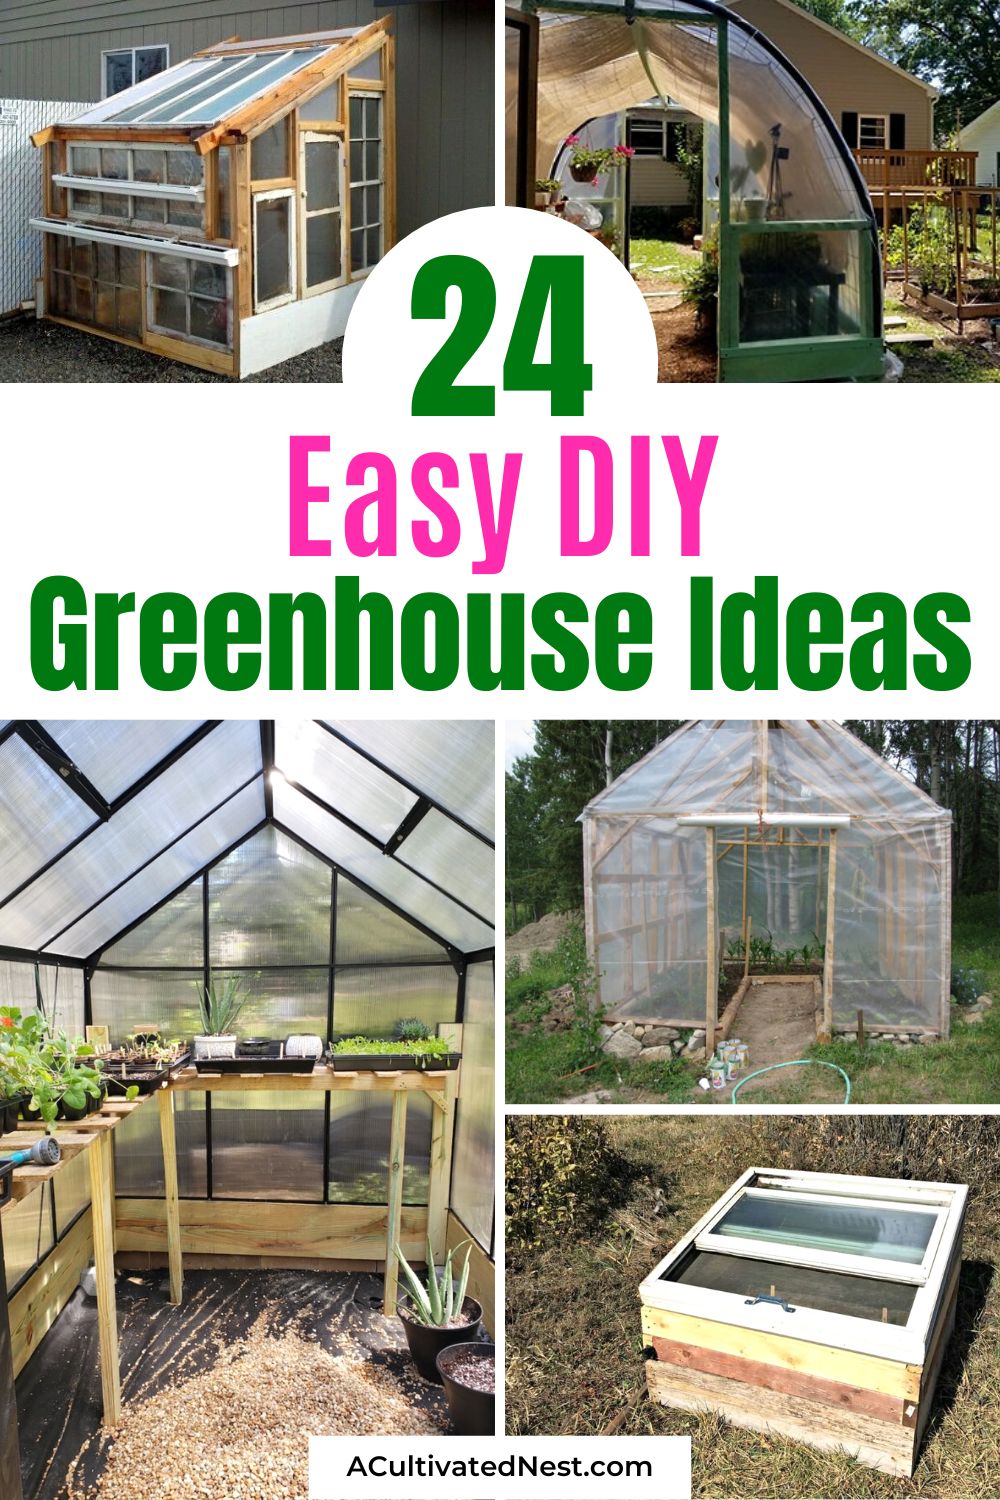 24 Easy DIY Greenhouse Ideas- Whether you have limited space or a generous backyard, find innovative designs and budget-friendly hacks to cultivate a thriving garden all year round with these easy DIY greenhouse ideas! | #GreenhouseDIY #GardenInspiration #GreenThumb #DIY #ACultivatedNest